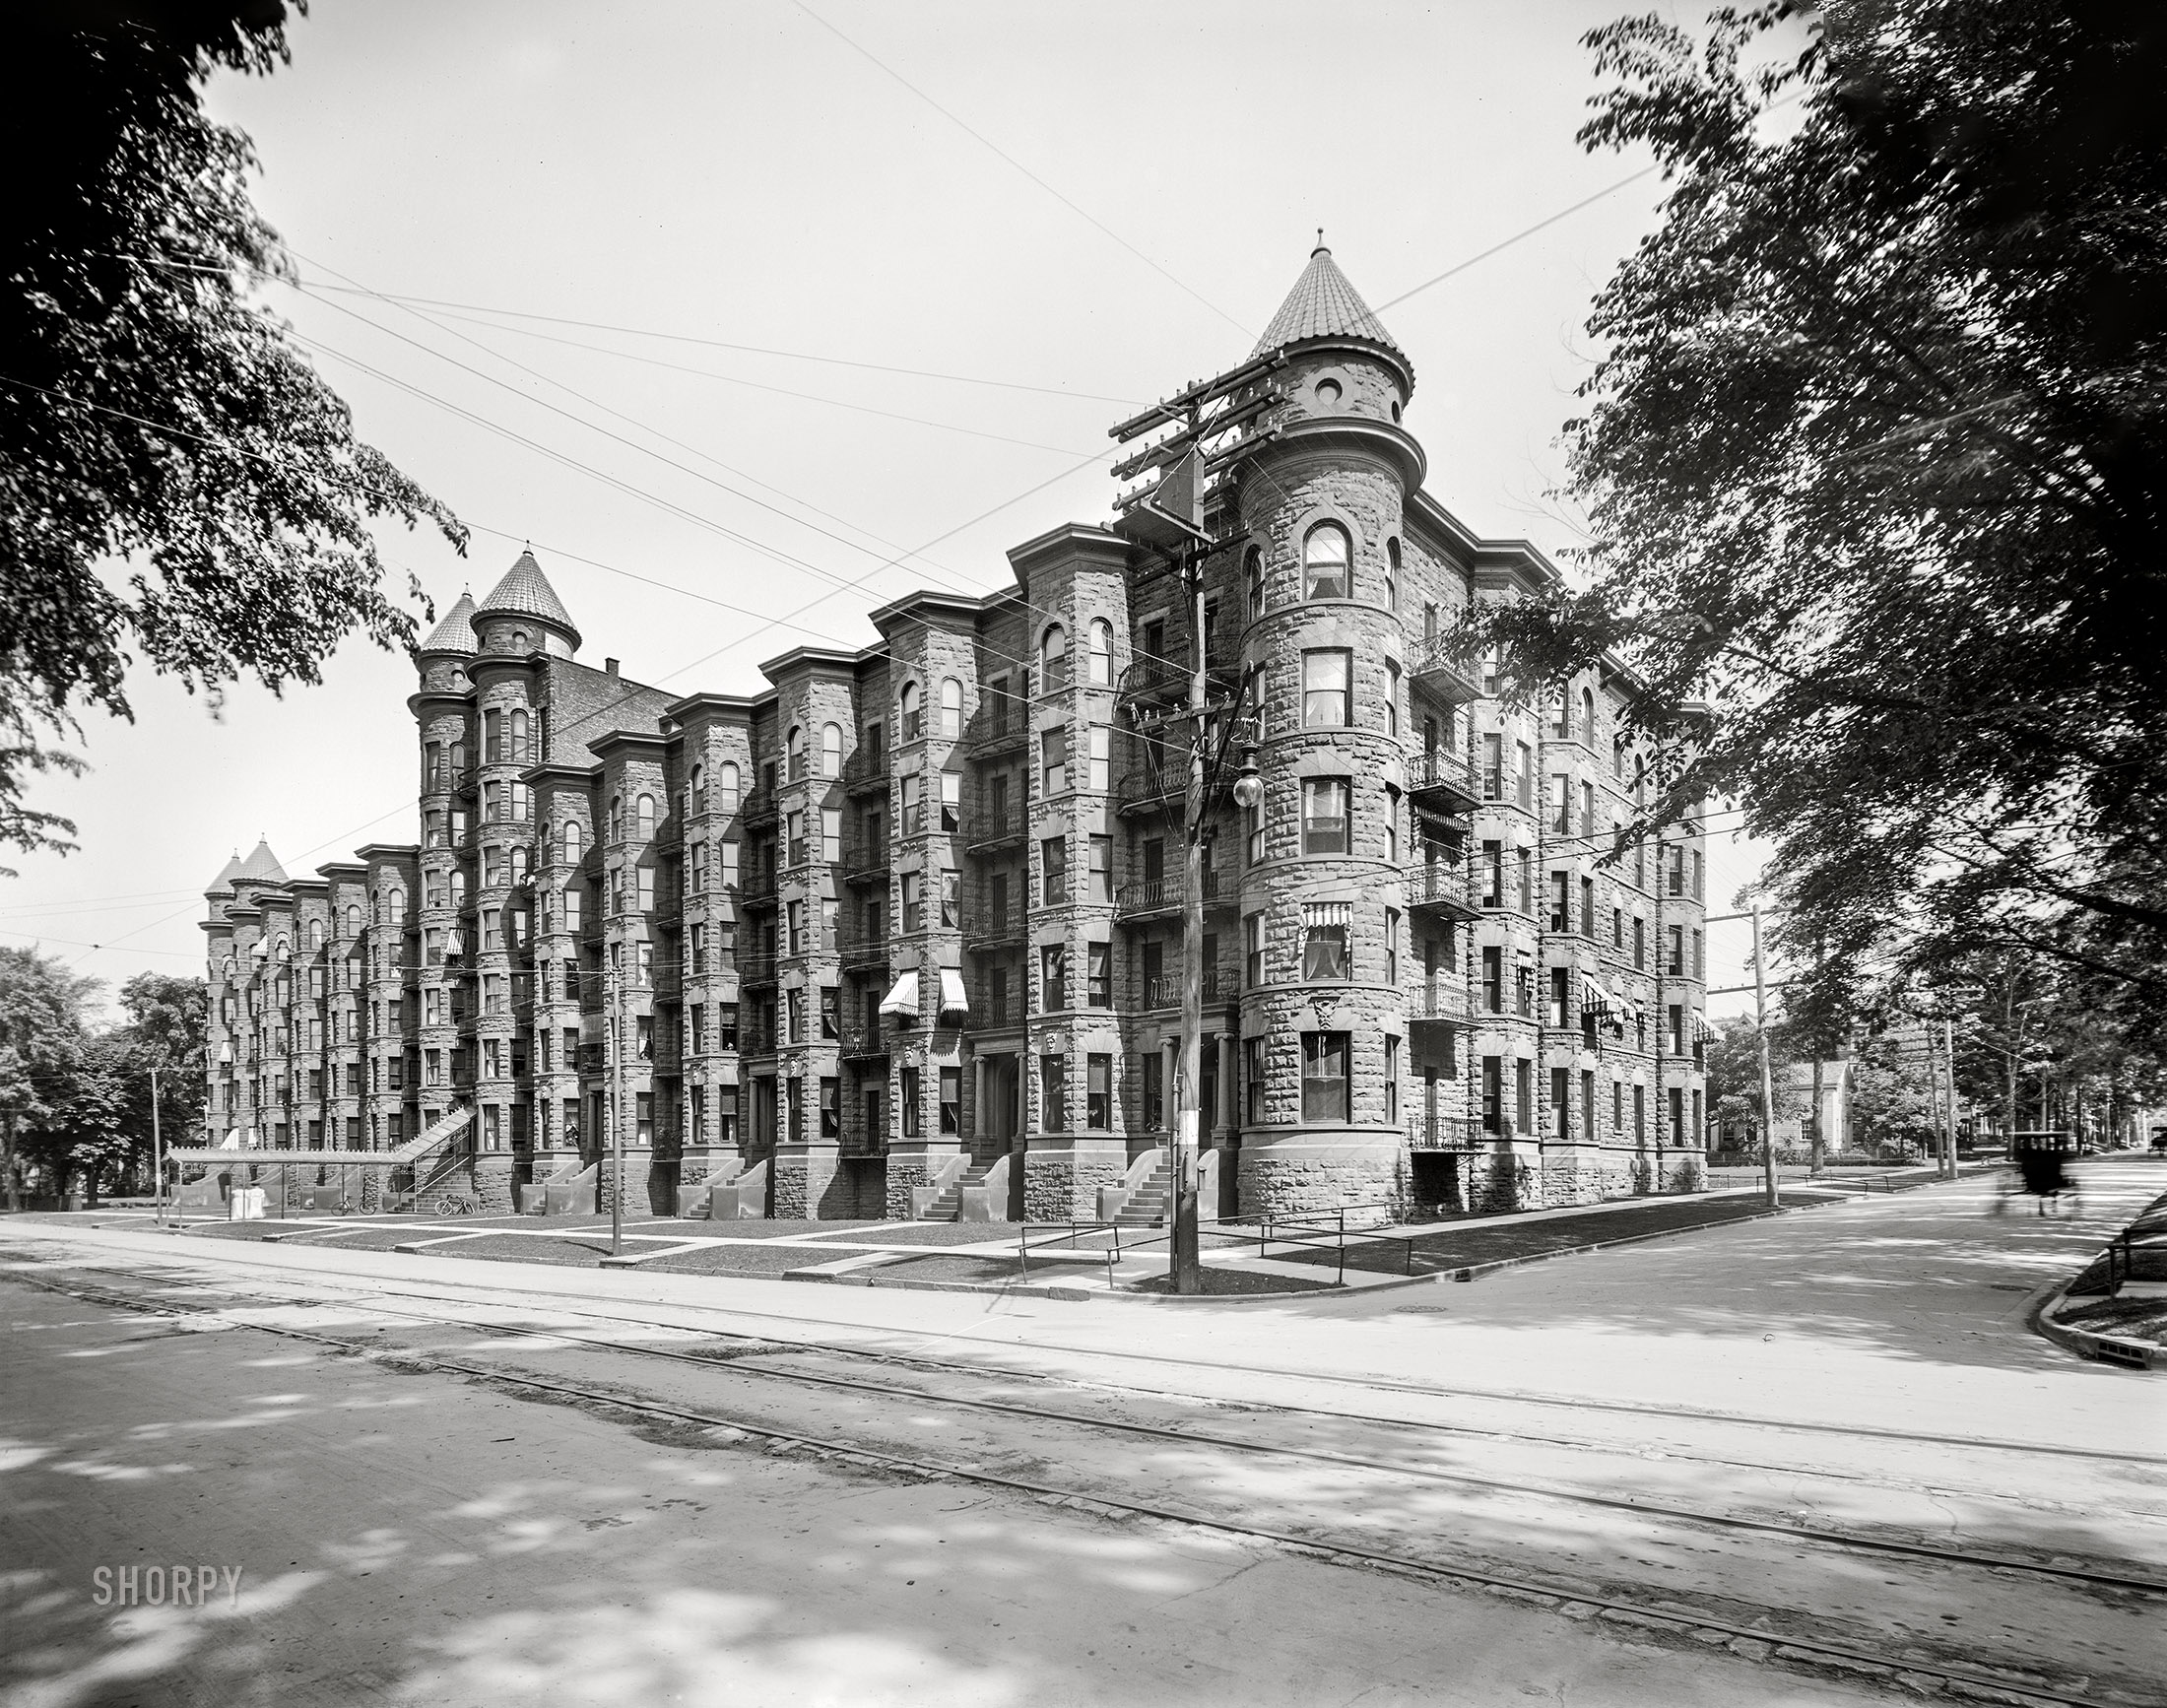 Circa 1906. "The Olbiston, Genesee Street, Utica, N.Y." Offering a mix of "bachelor and family apartments," the fireproof Olbiston, completed around 1900, still stands.  View full size.